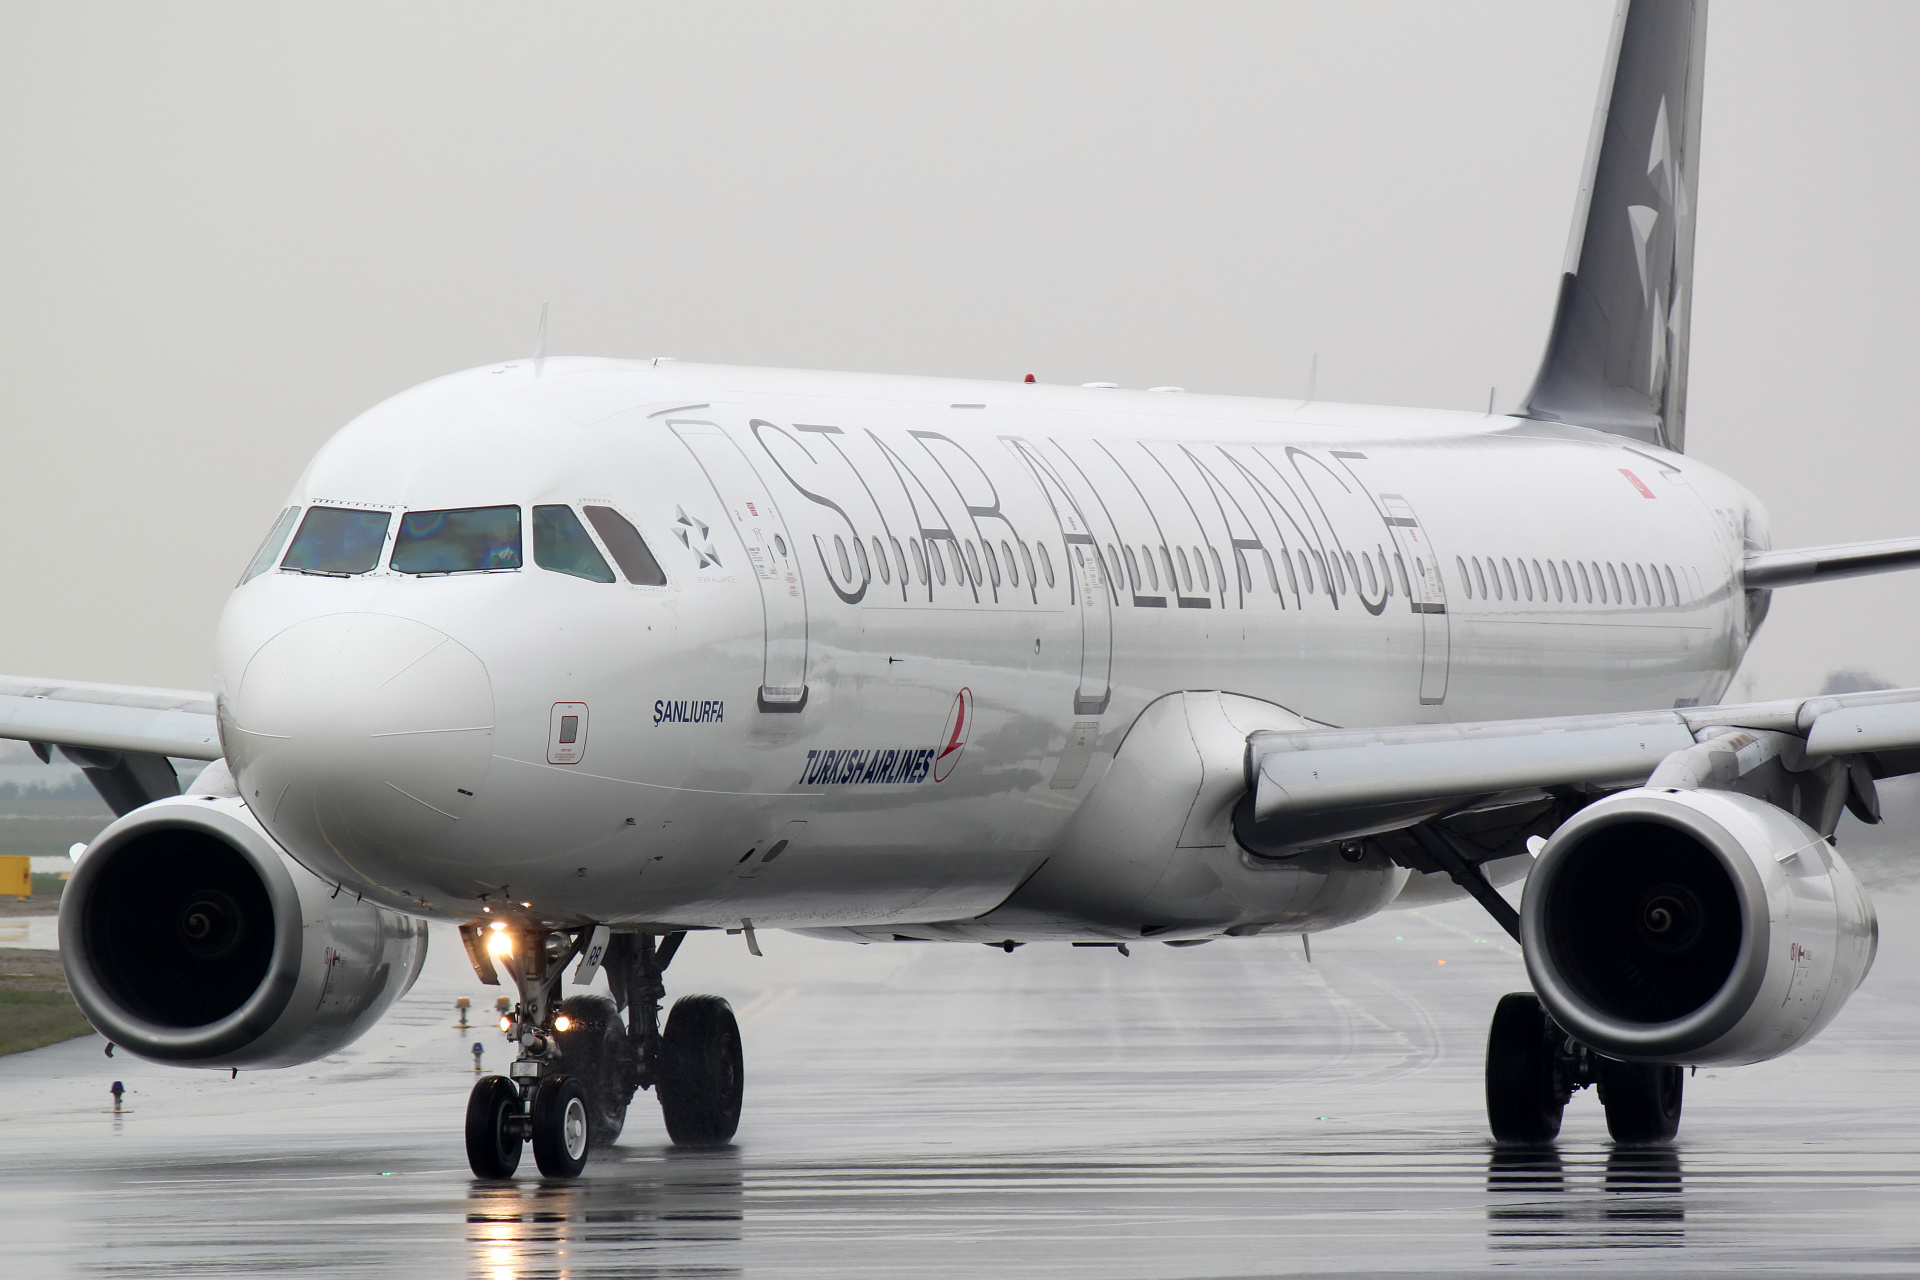 TC-JRB (Star Alliance livery) (Aircraft » EPWA Spotting » Airbus A321-200 » THY Turkish Airlines)